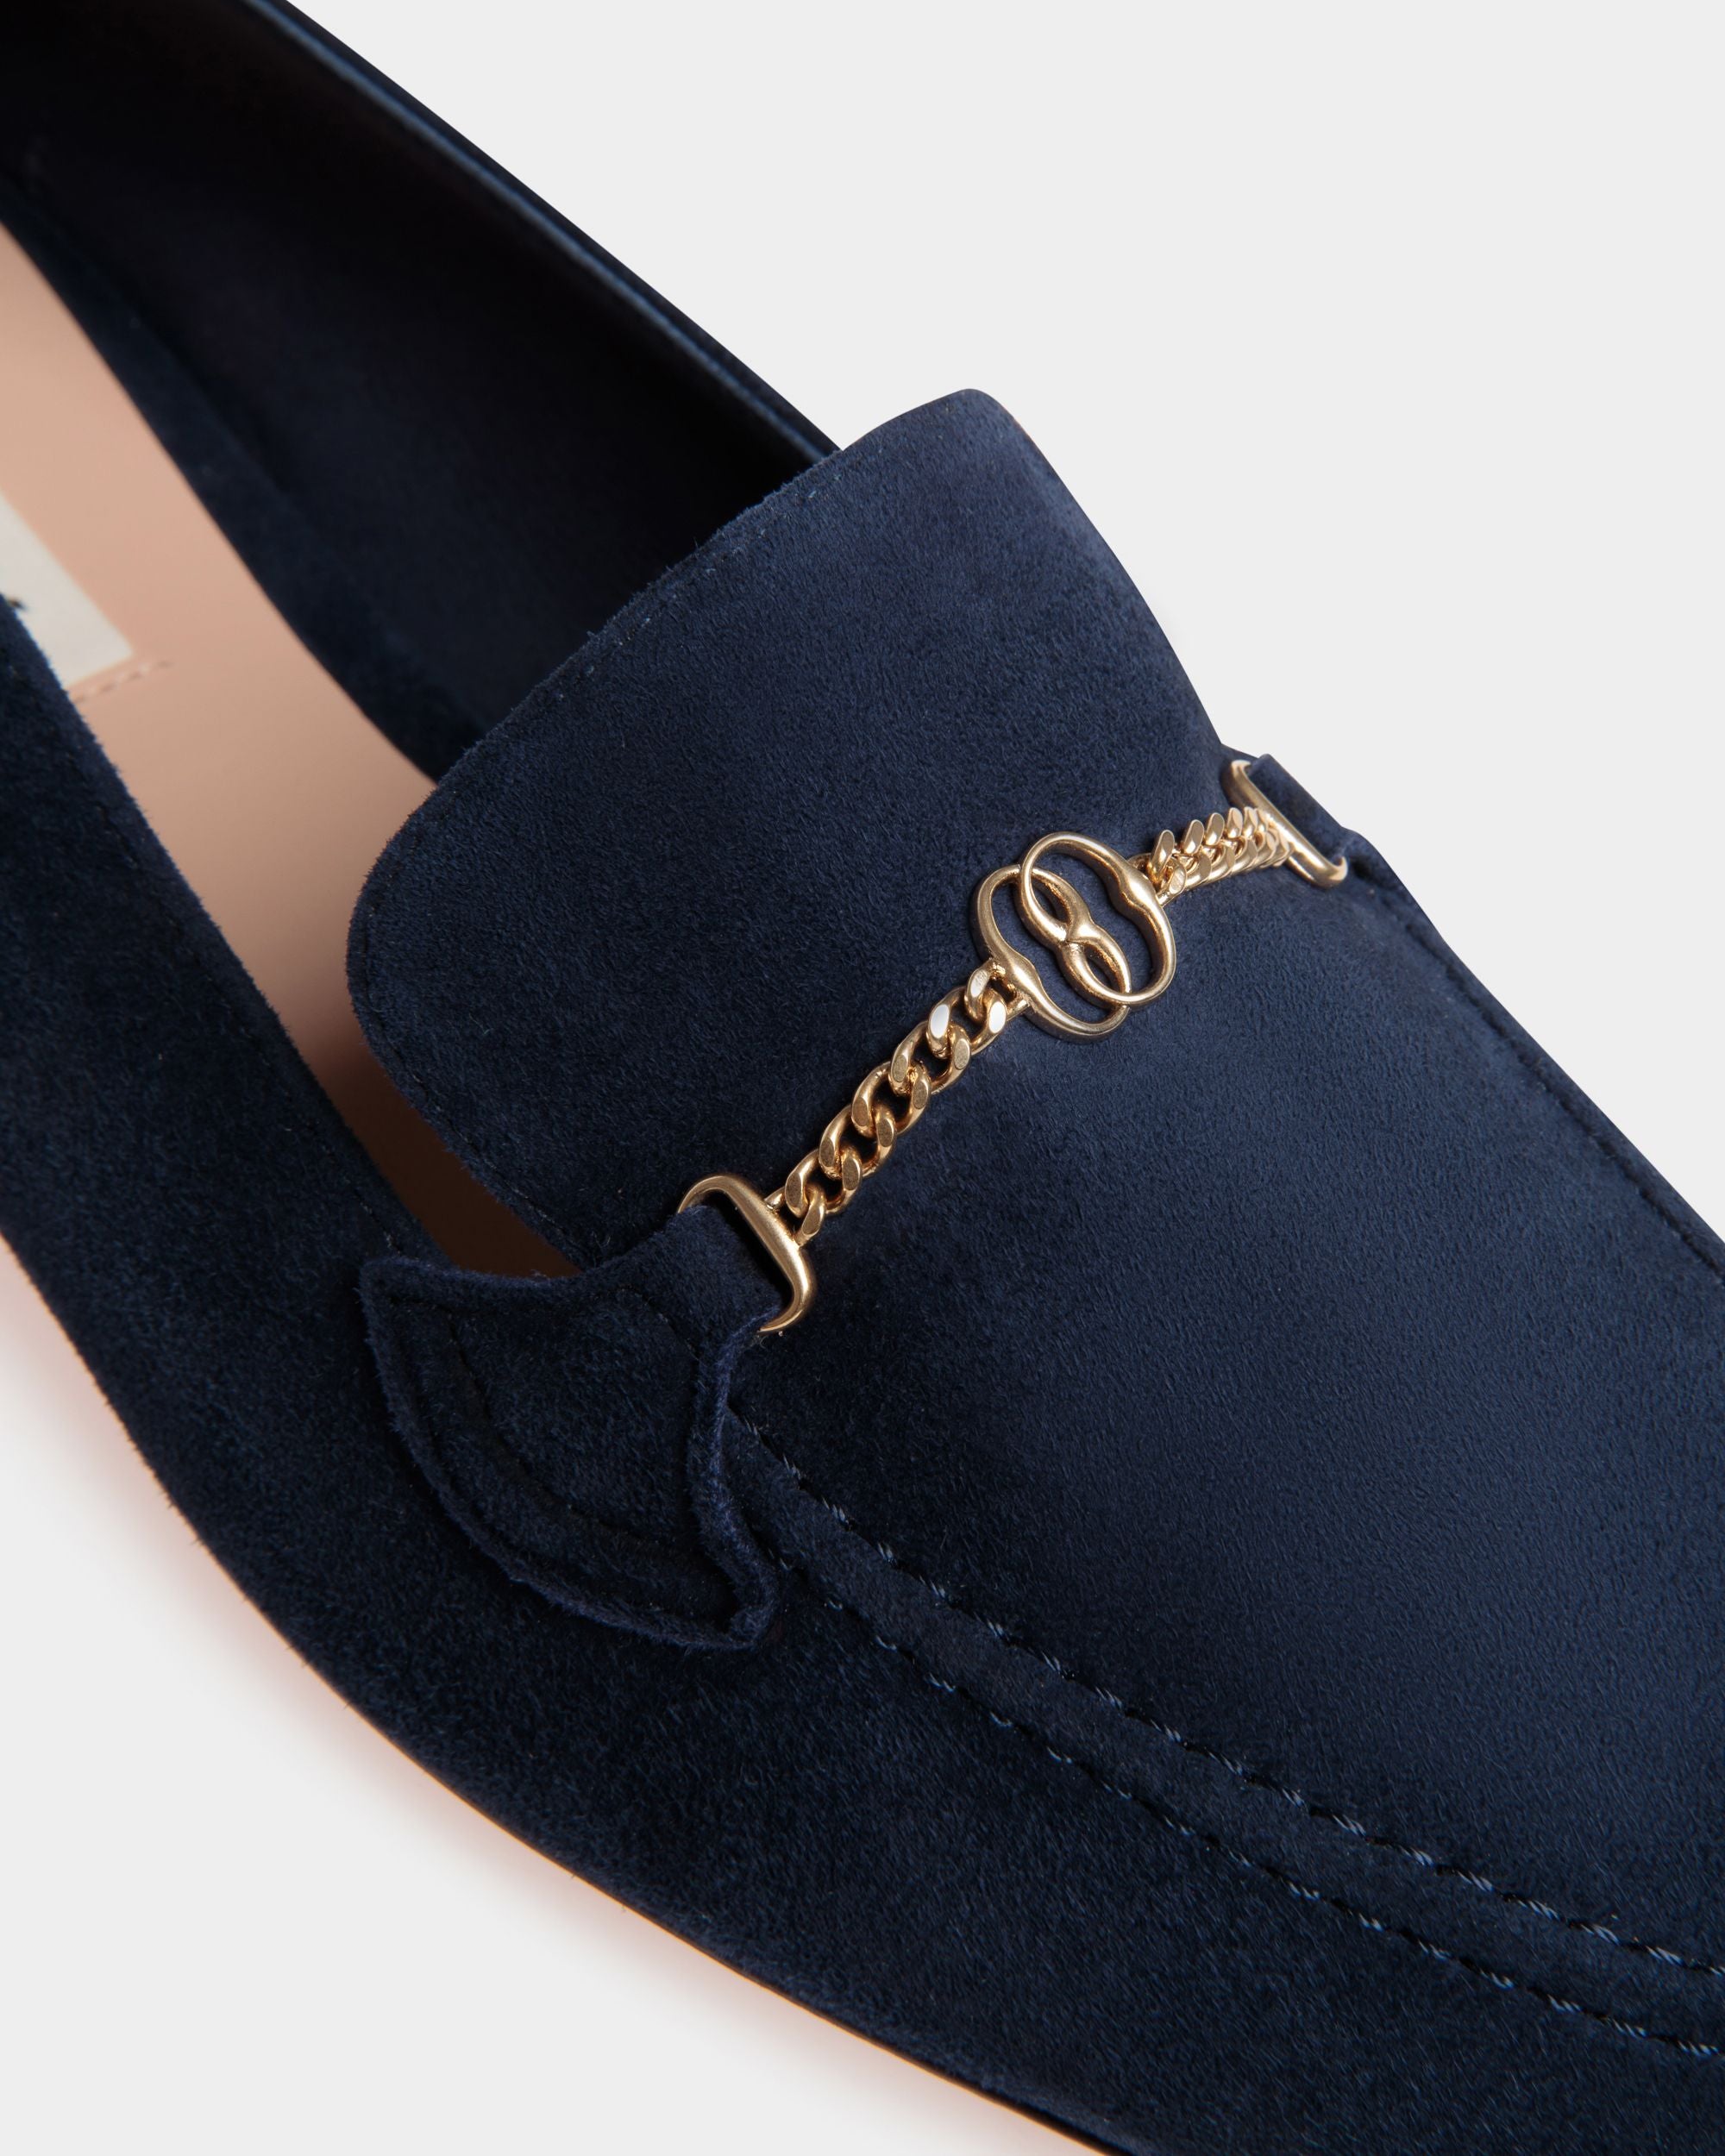 Daily Emblem | Women's Loafer in Blue Suede | Bally | Still Life Detail